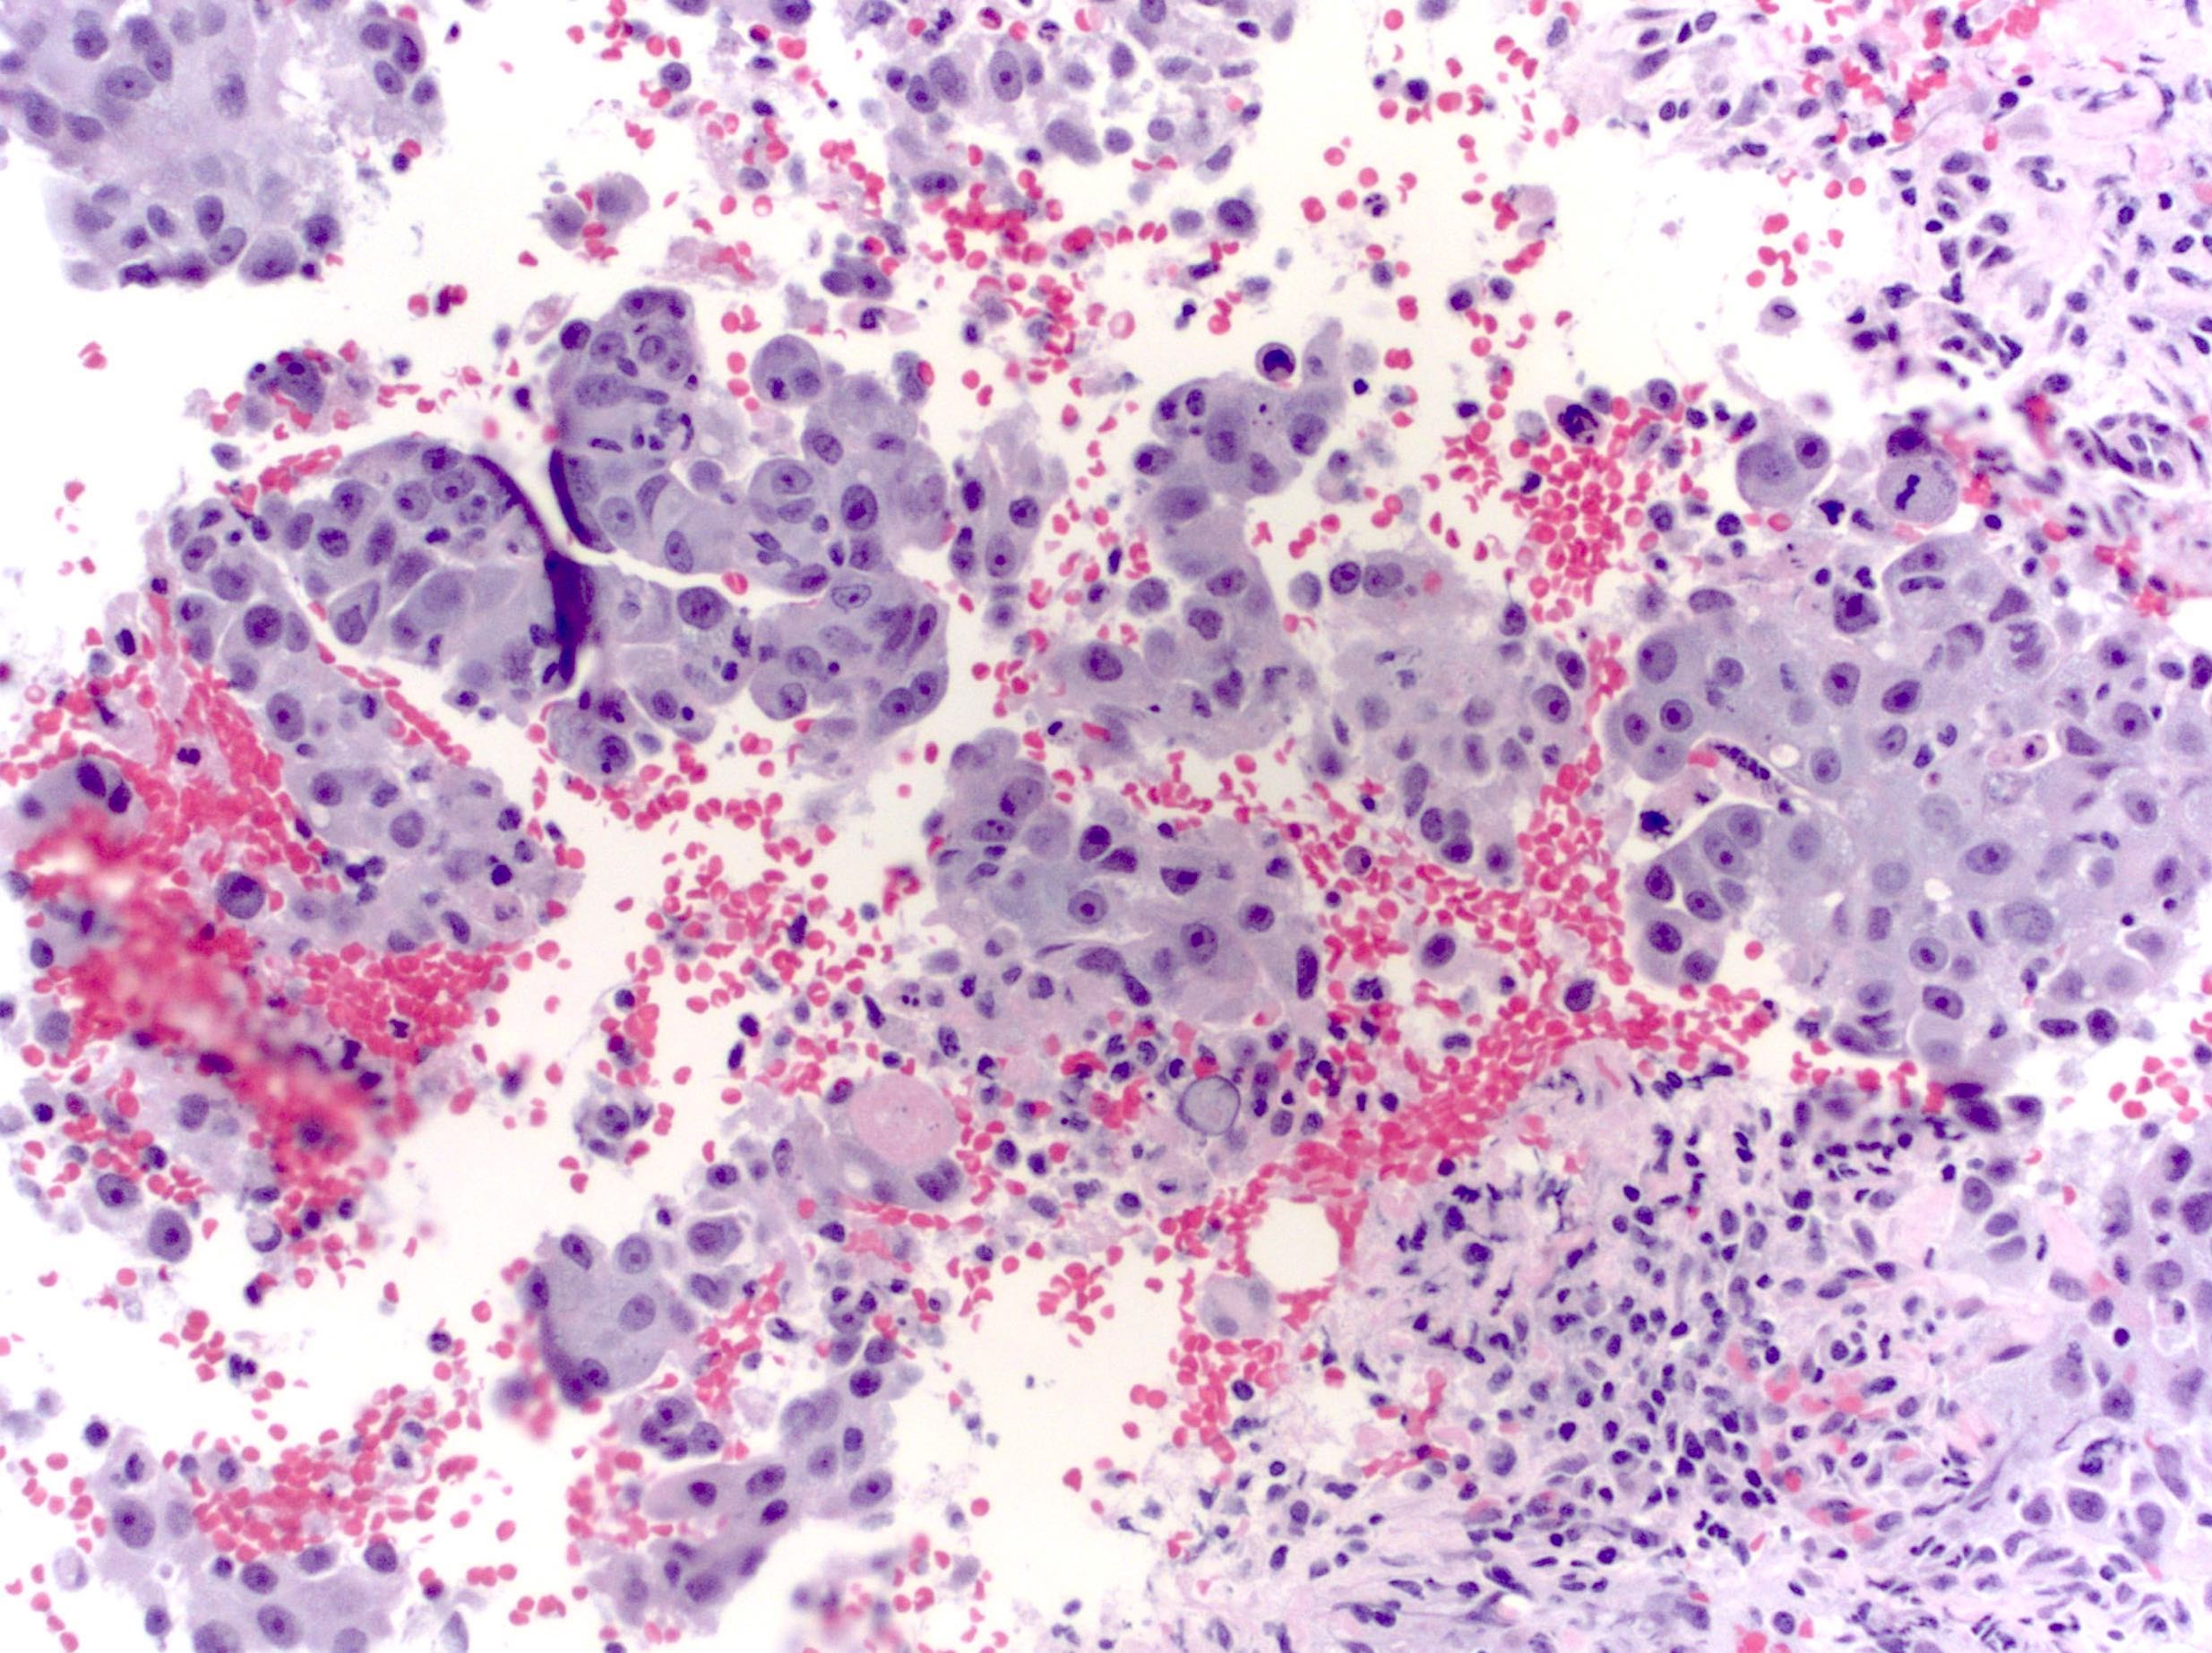 Poorly differentiated breast carcinoma